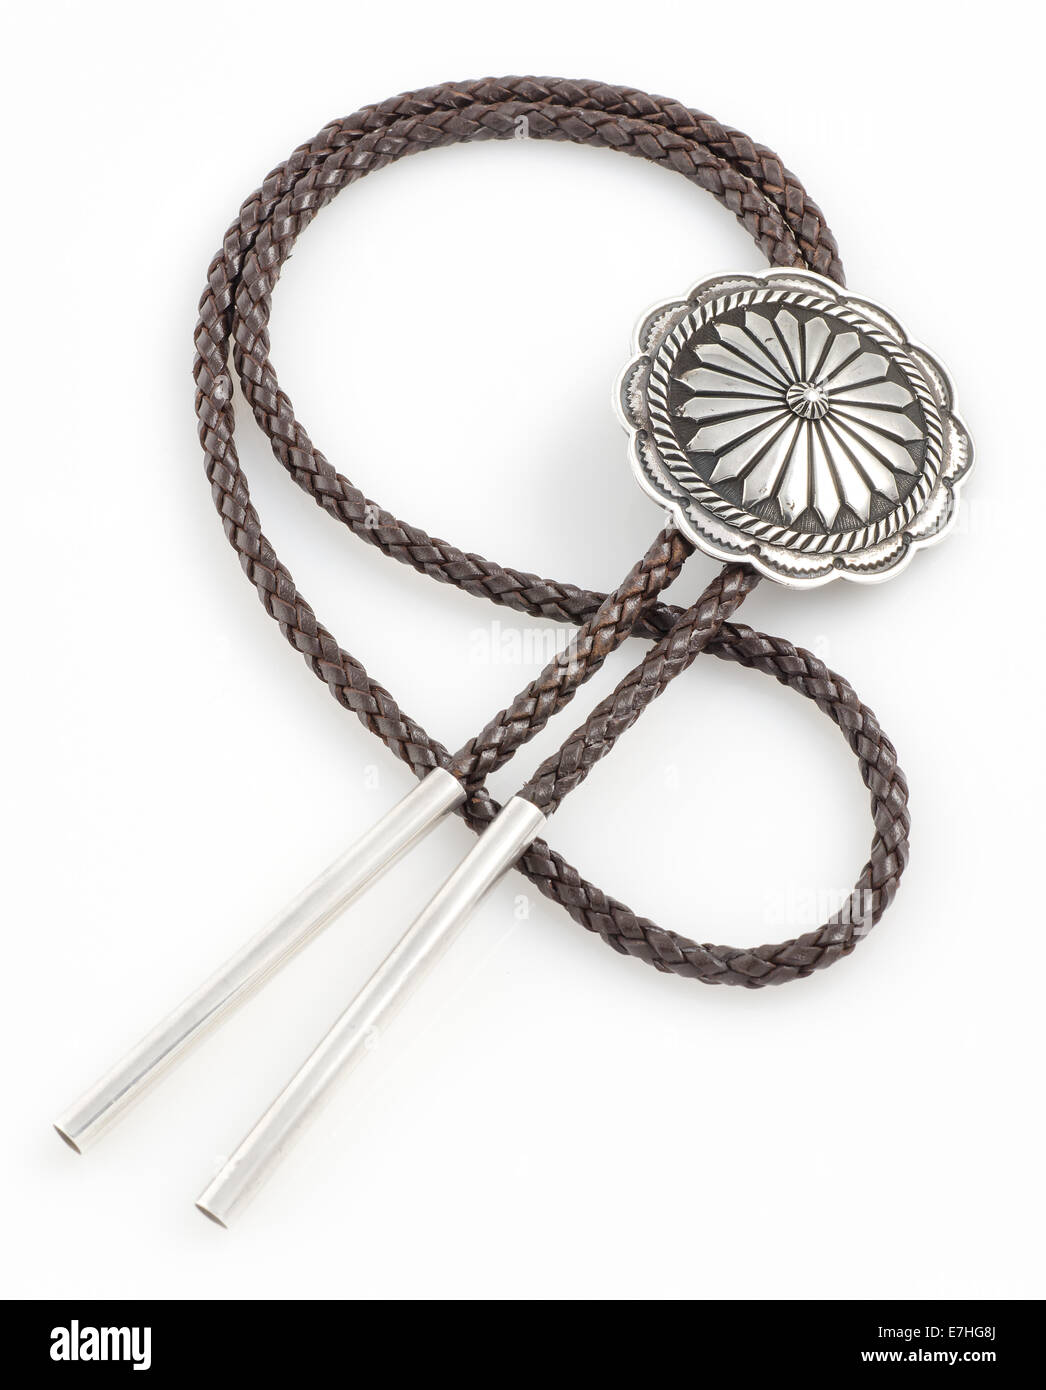 Braided Bolo Tie with Concho. Stock Photo